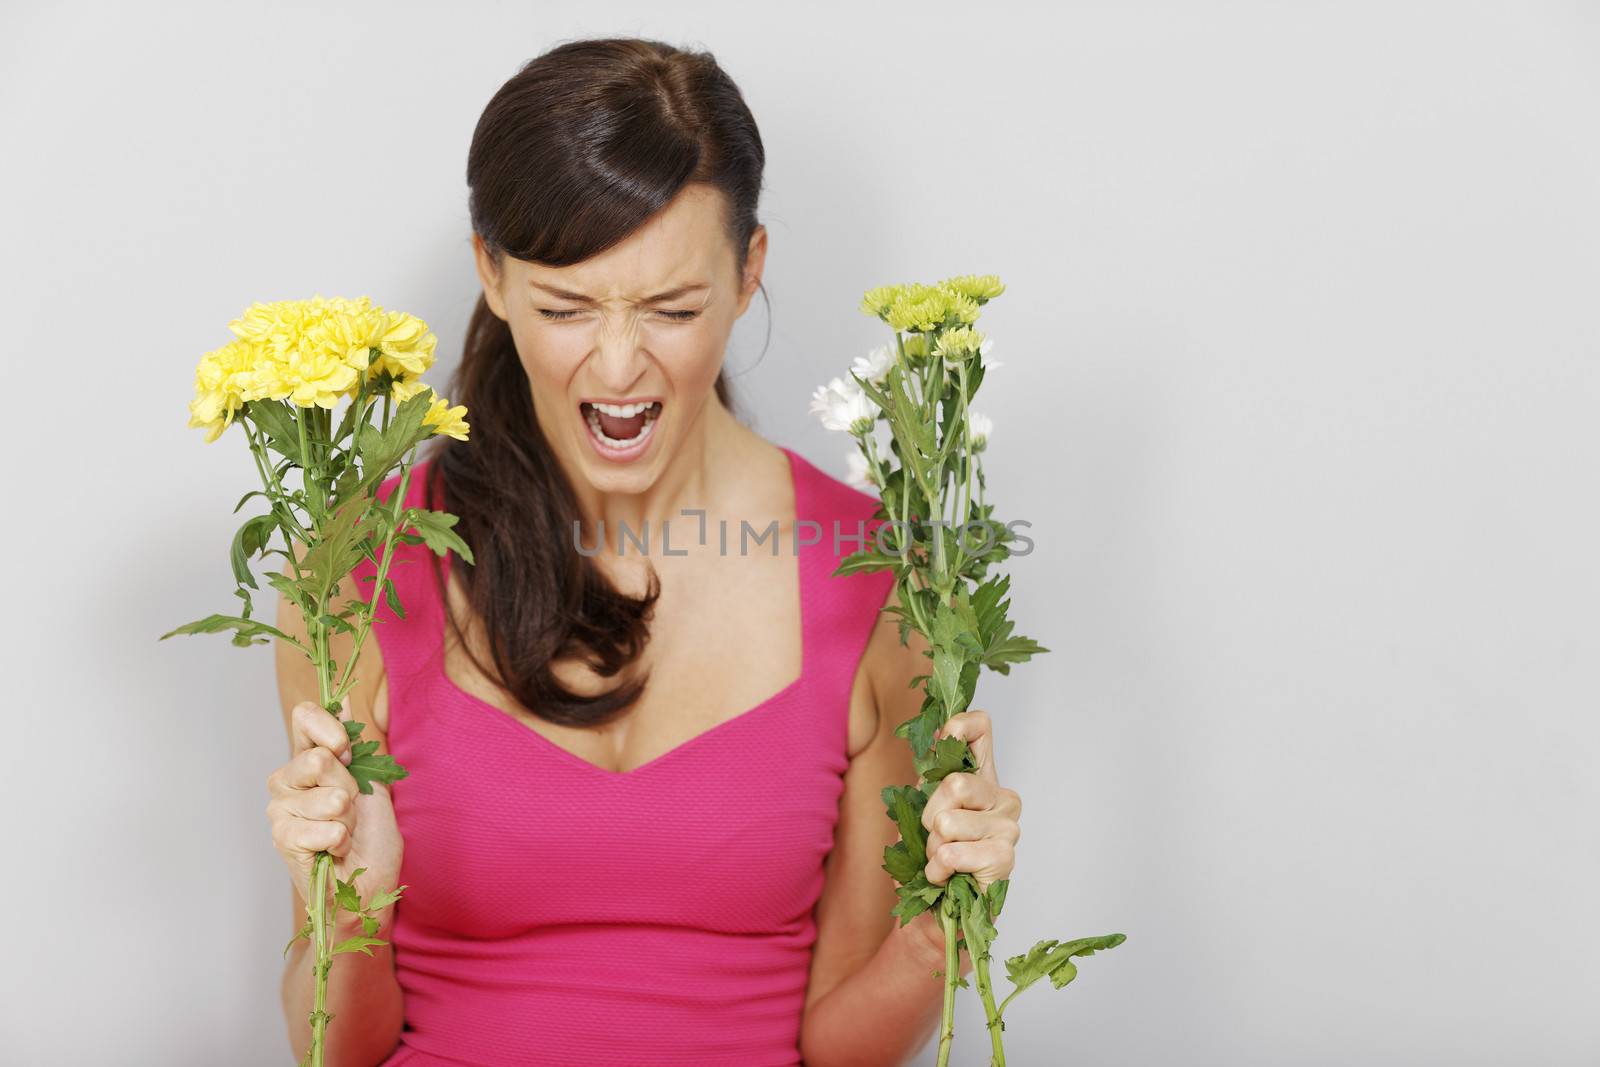 Woman angry with flowers by studiofi